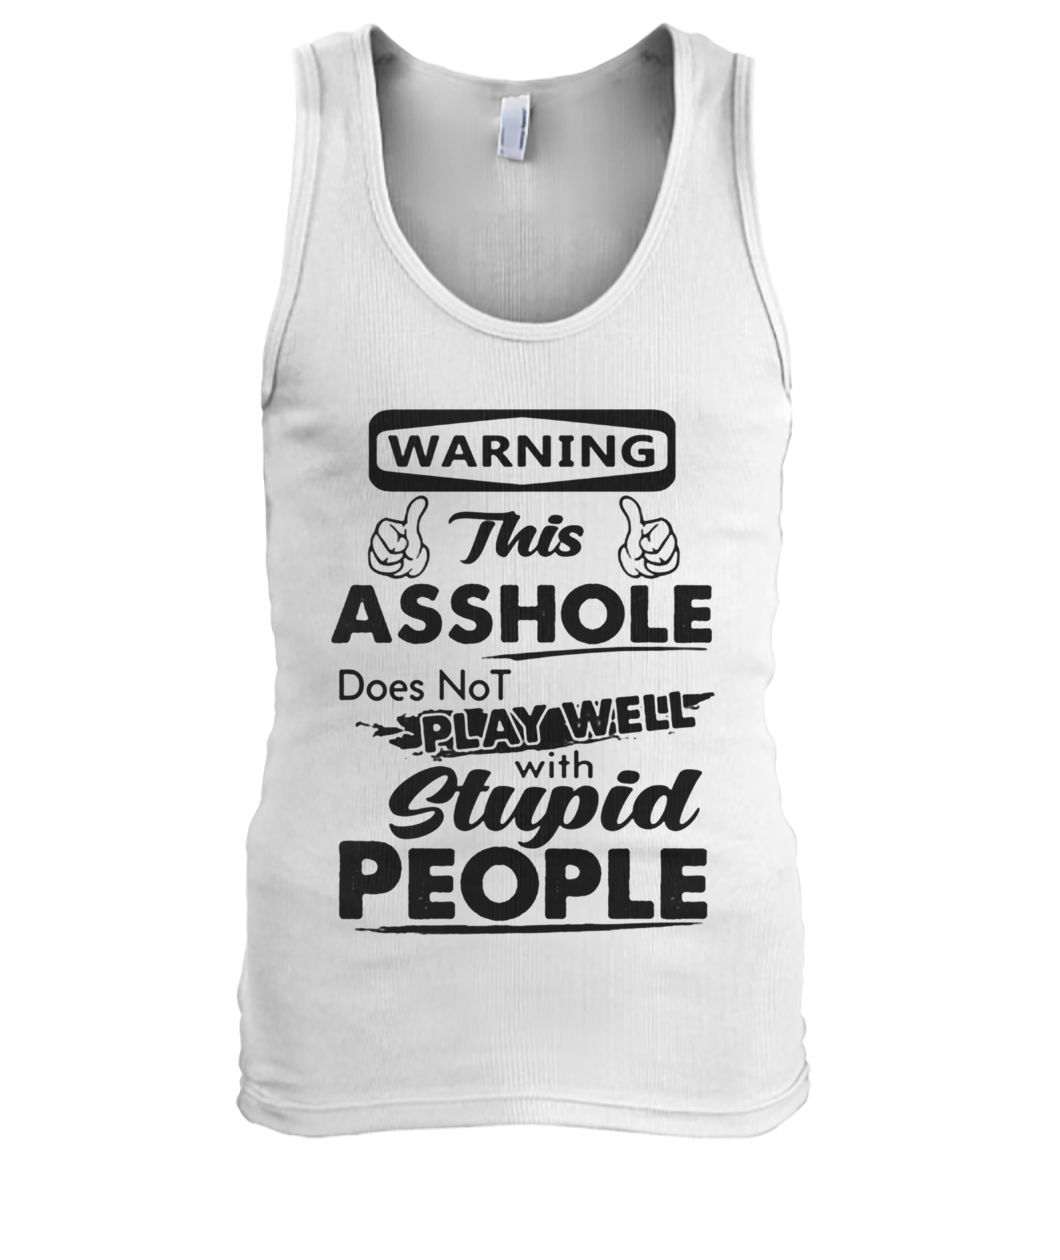 Warning this asshole does not play well with stupid people men's tank top